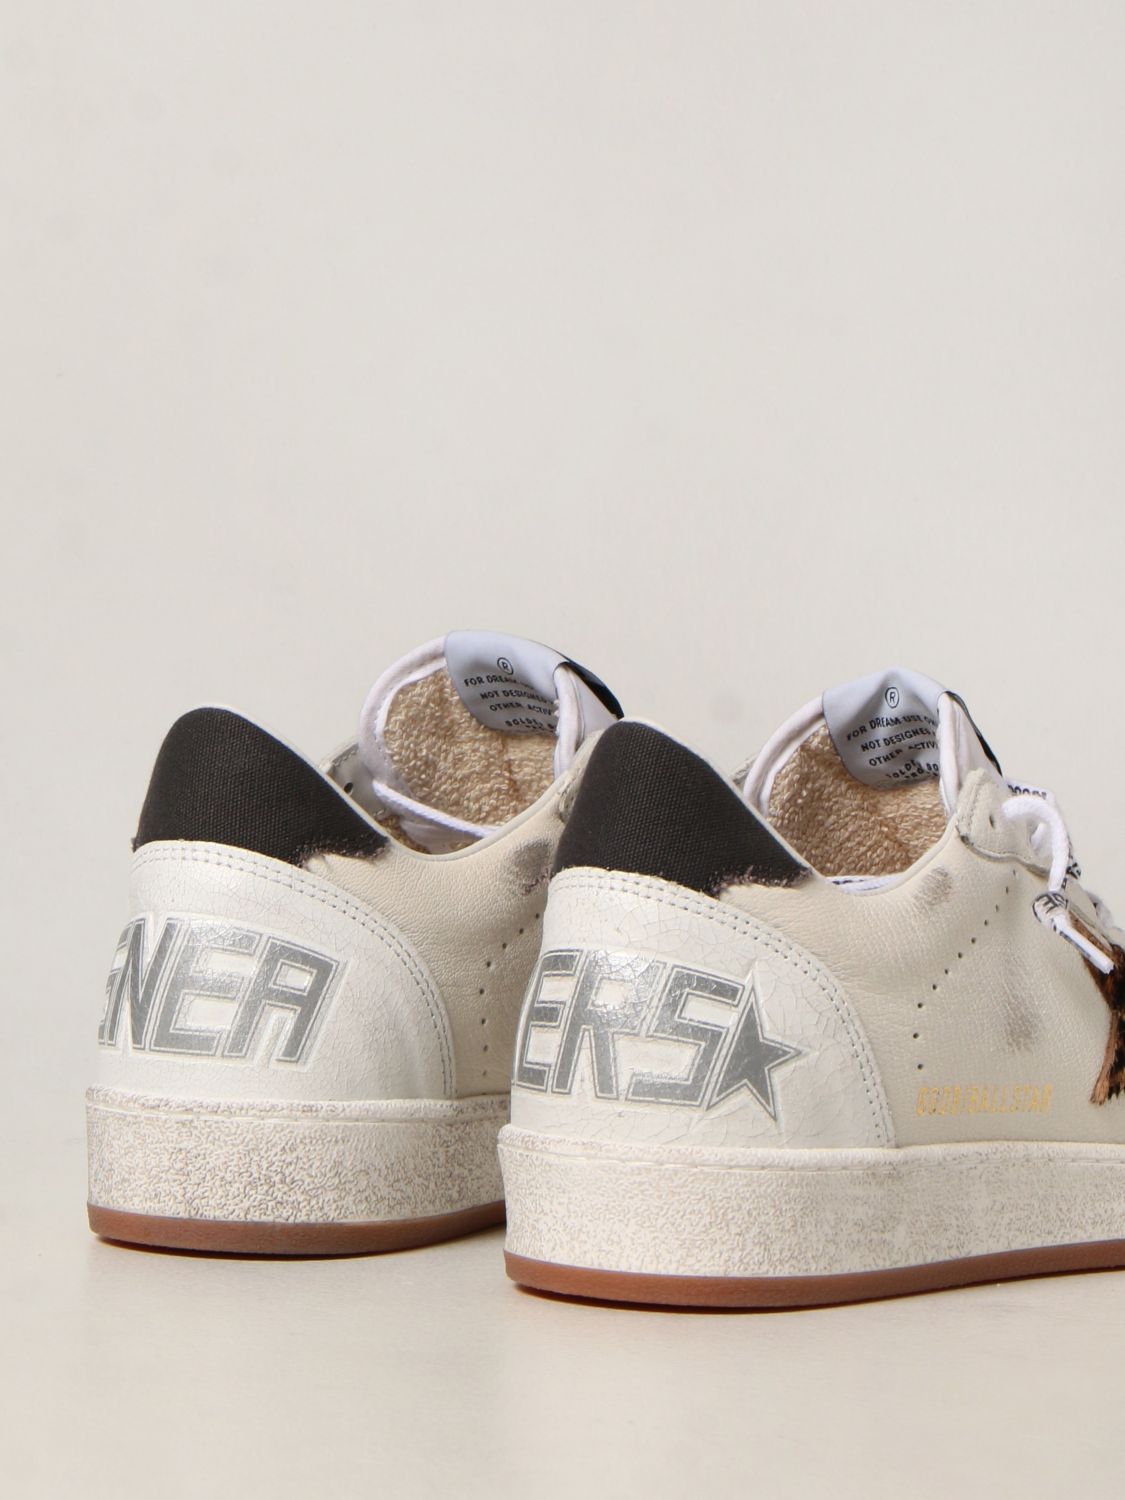 Trainers Golden Goose: Ball Star Golden Goose trainers in worn leather white 3